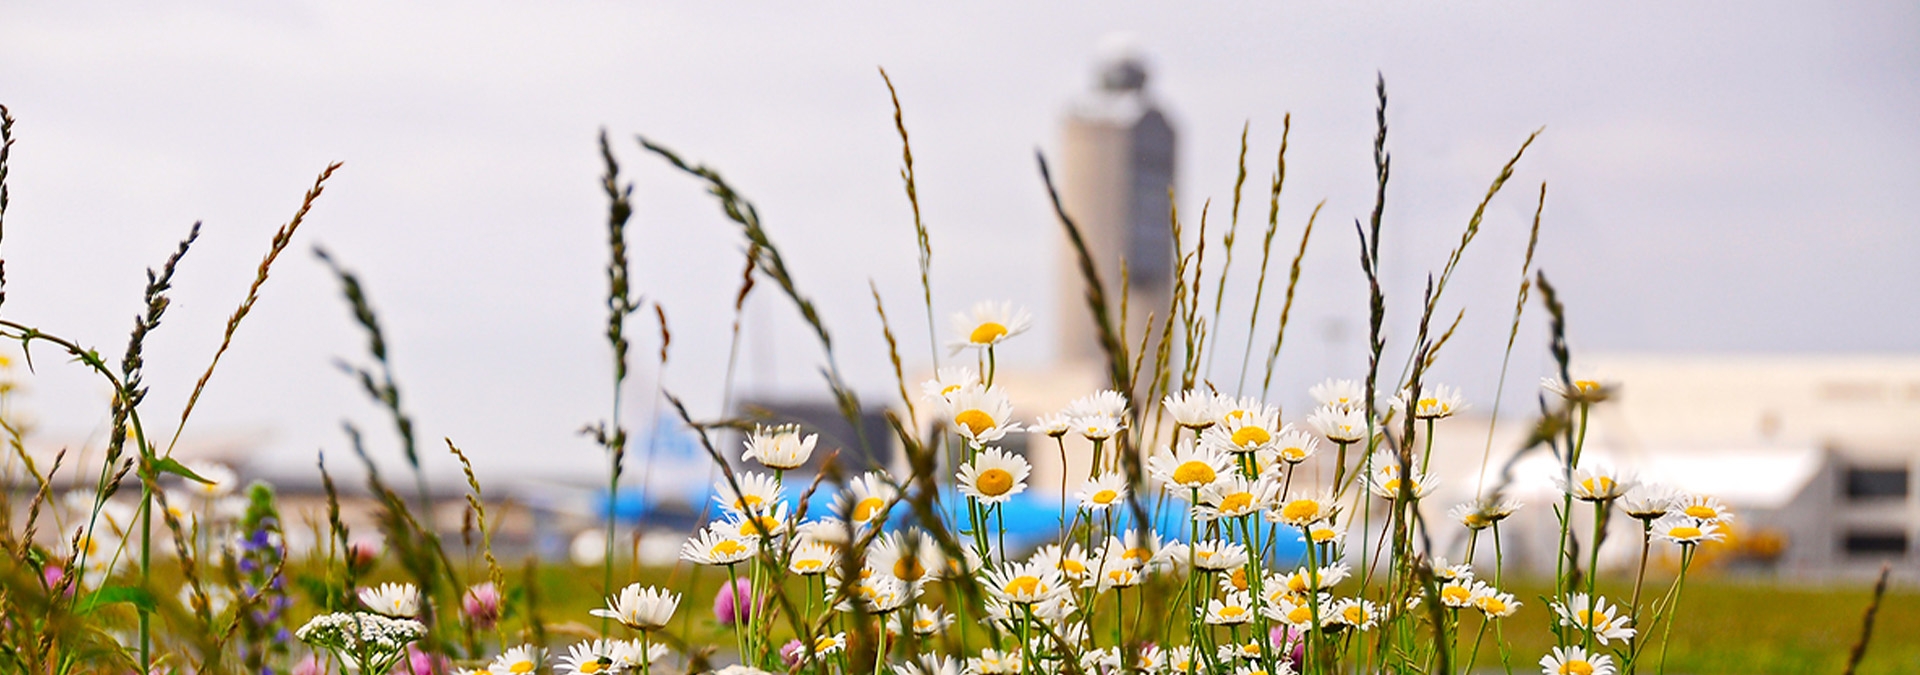 Wildflowers with Logan Airport control tower in the background